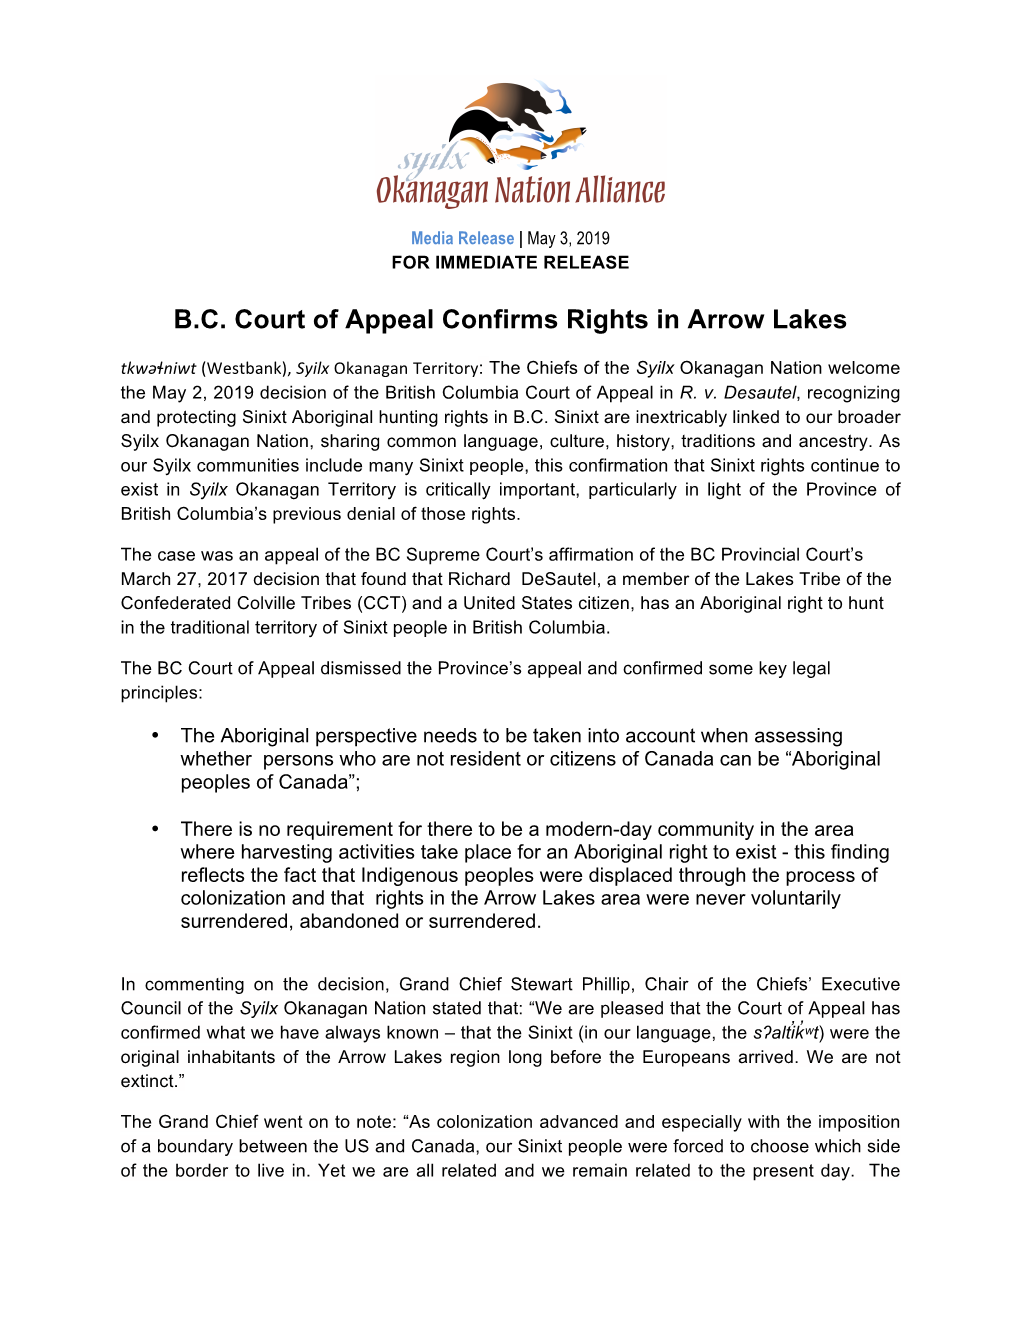 B.C. Court of Appeal Confirms Rights in Arrow Lakes